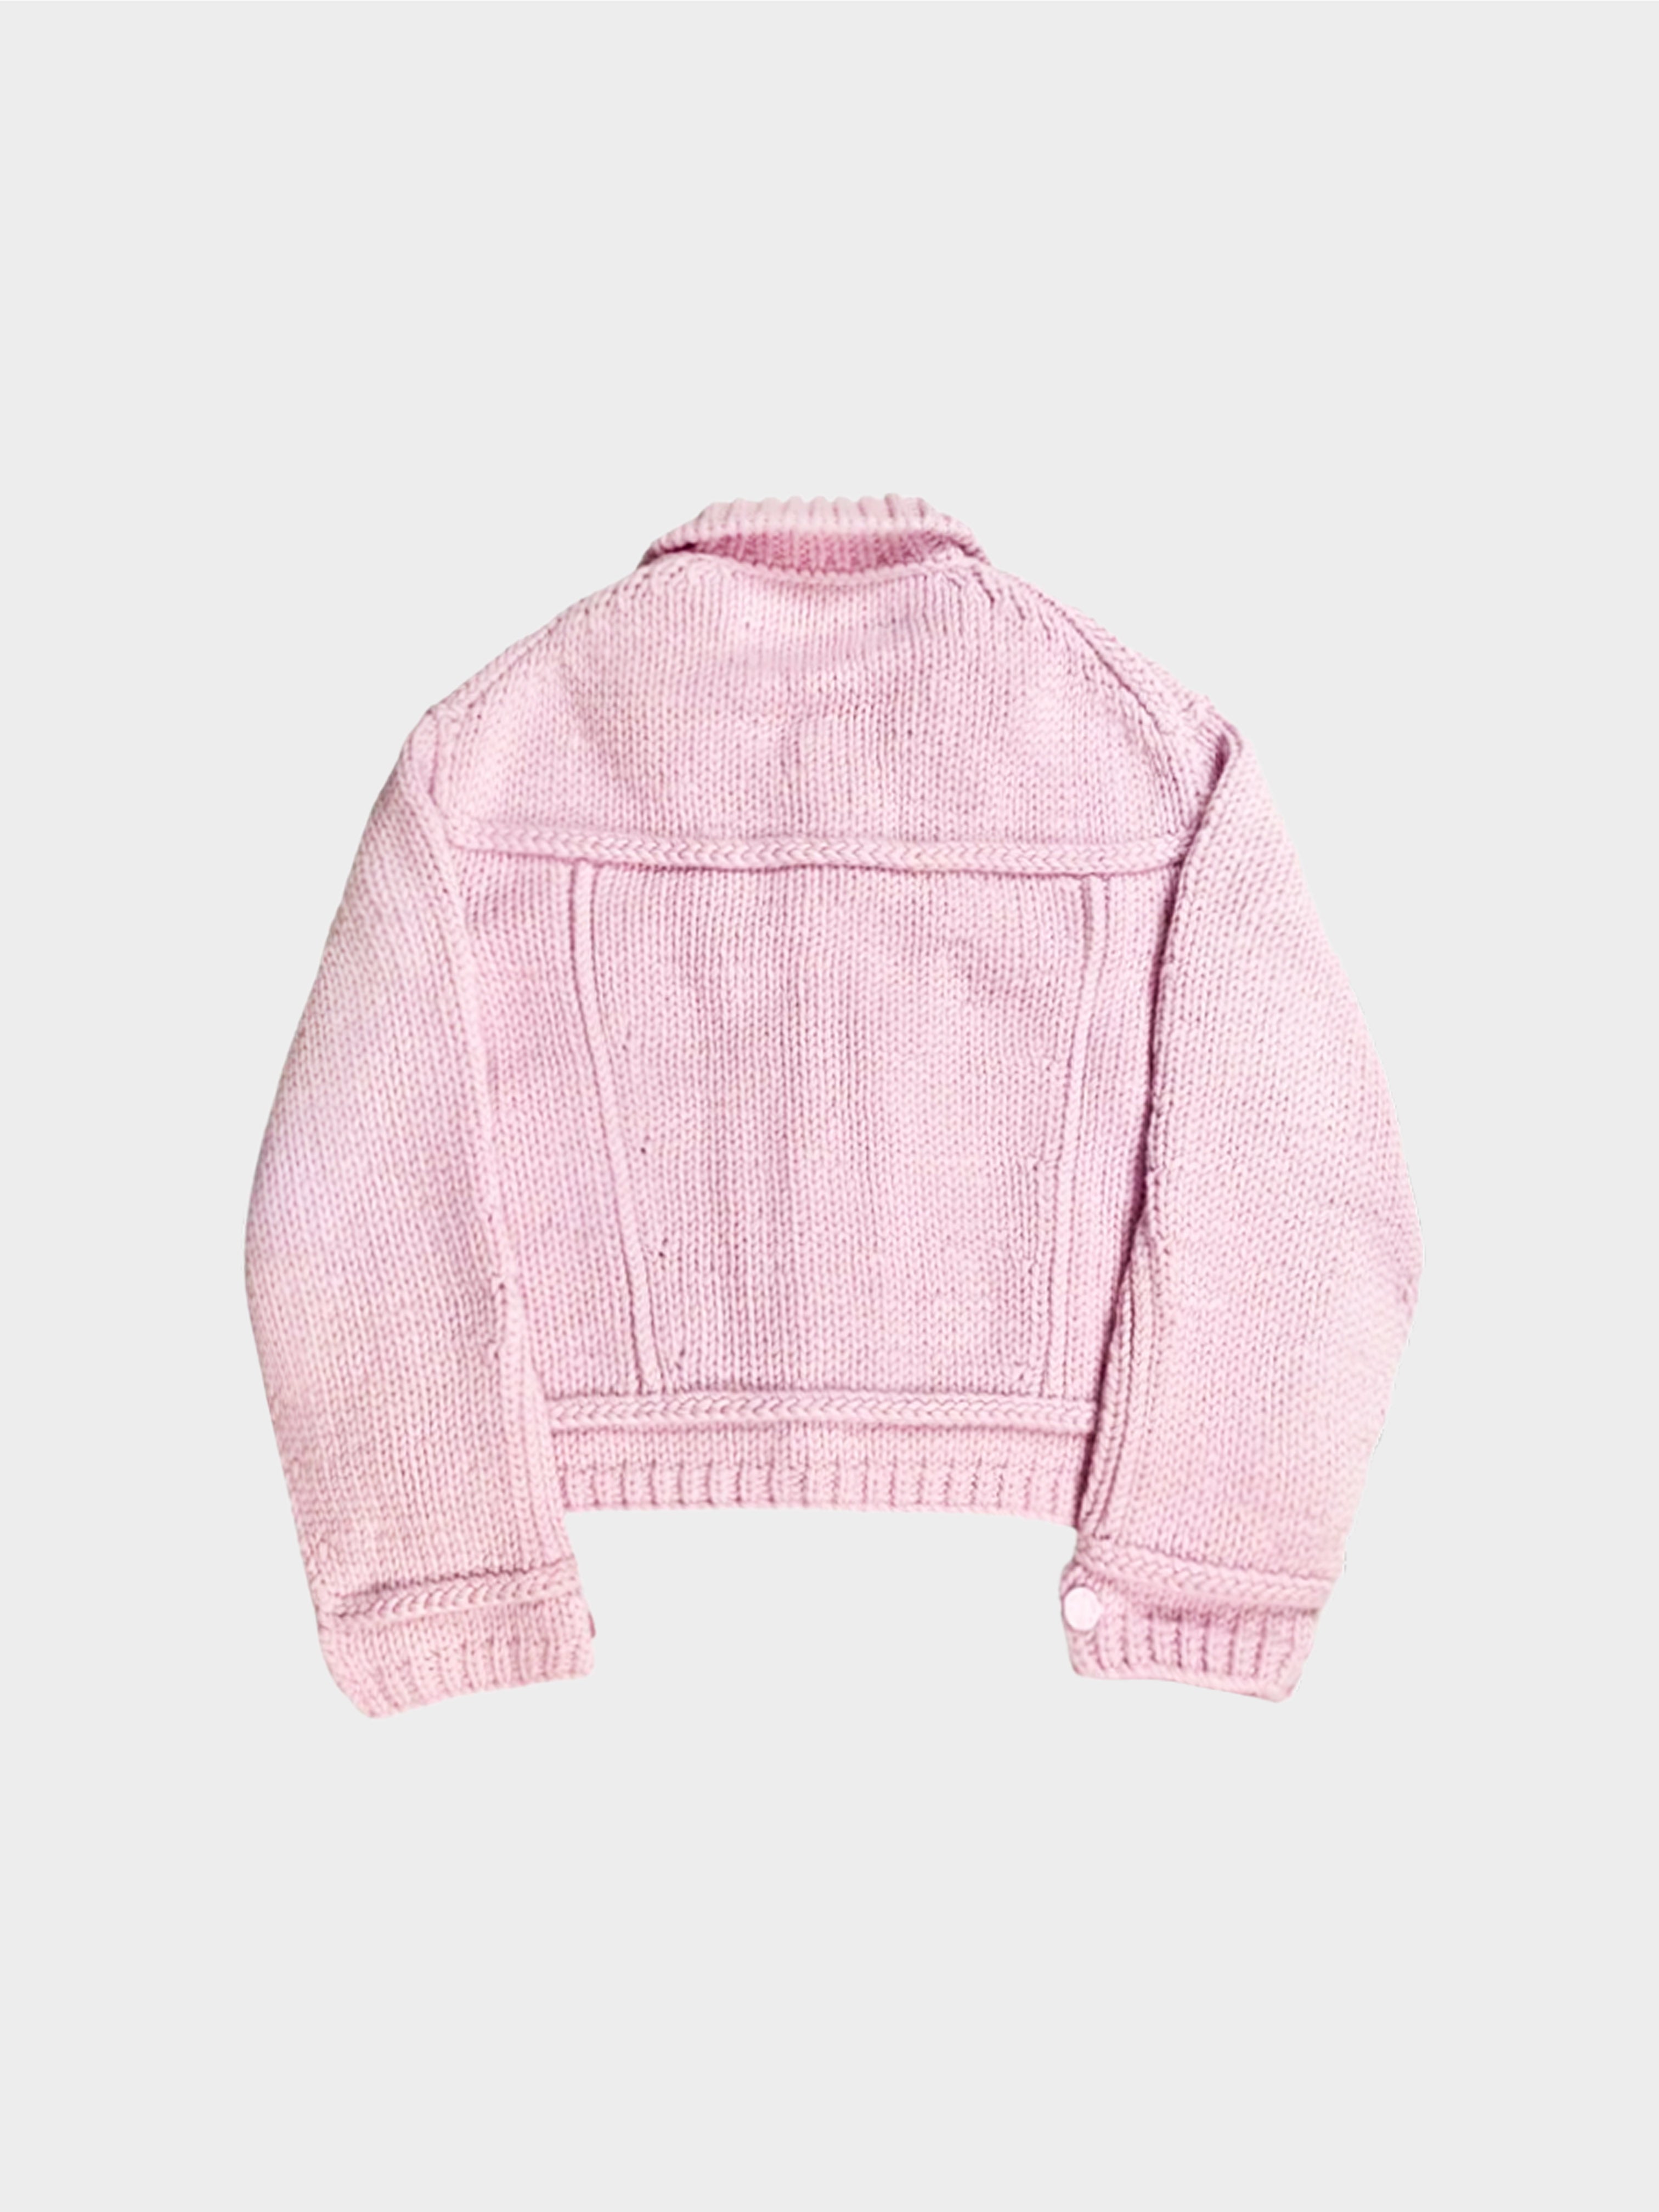 LV SS20 ASIA EXCLUSIVE PINK CHUNKY HEAVY KNIT TRUCKER JACKET SIZE